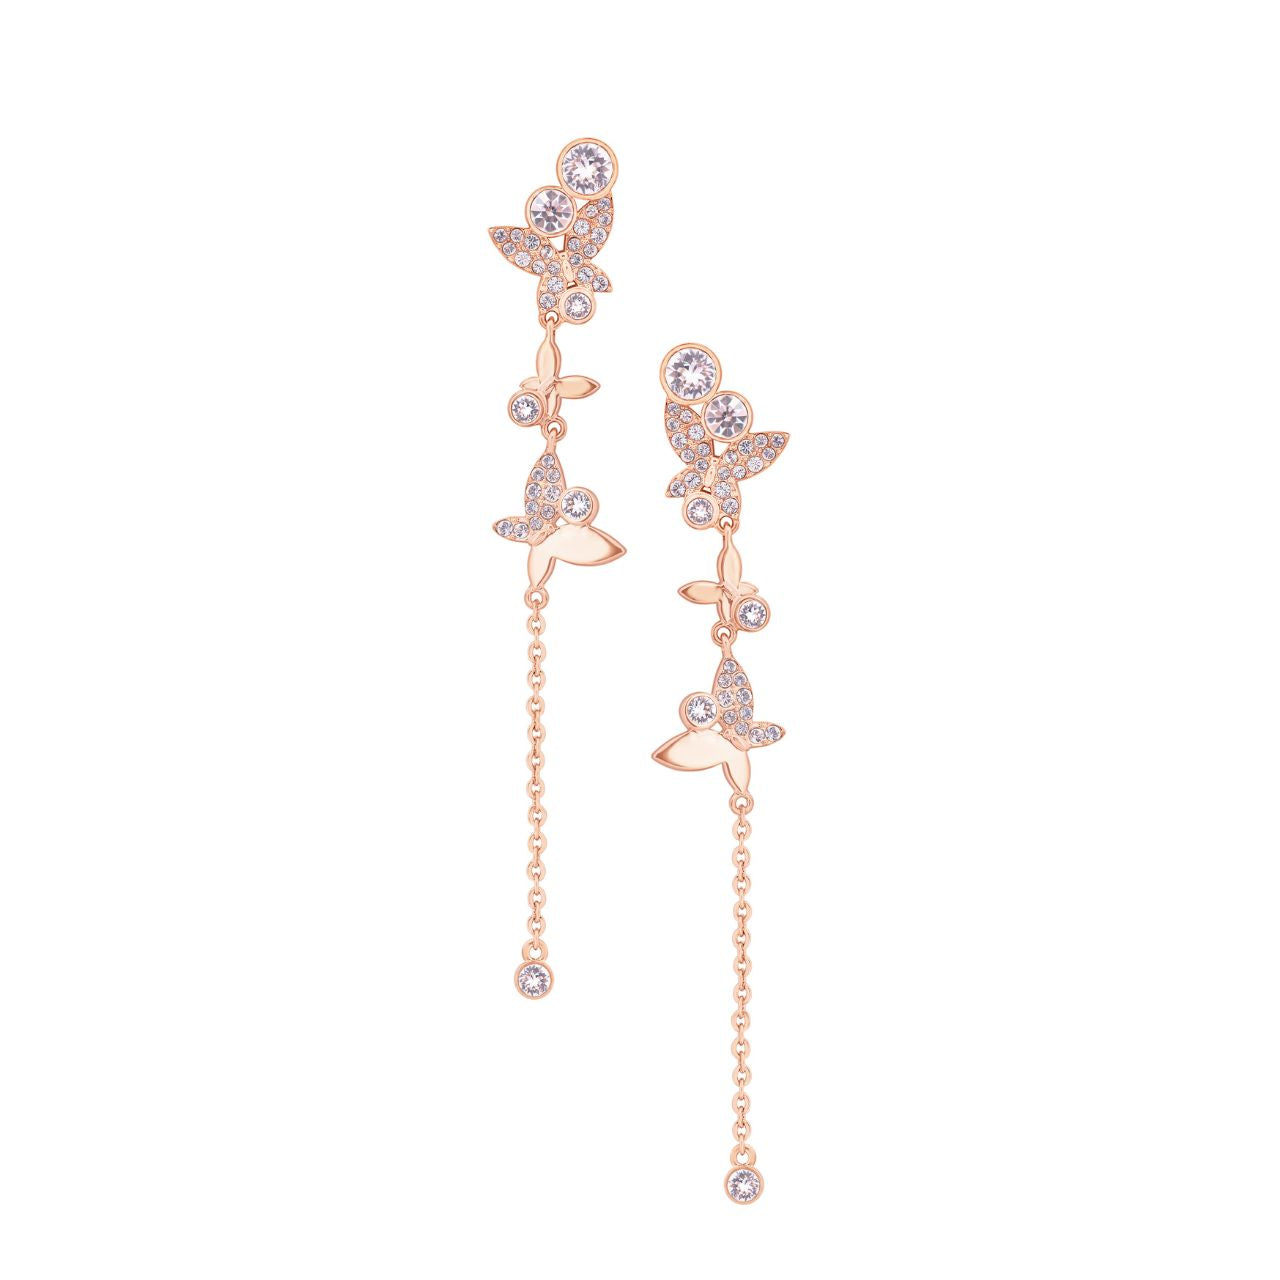 Tipperary Crystal Butterfly Rose Gold Drop Earrings  Drawing inspiration from urban garden, the Tipperary Crystal Butterfly collection transforms an icon into something modern and unexpected. Playful and elegant, this collection draws from the inherent beauty of the butterfly.